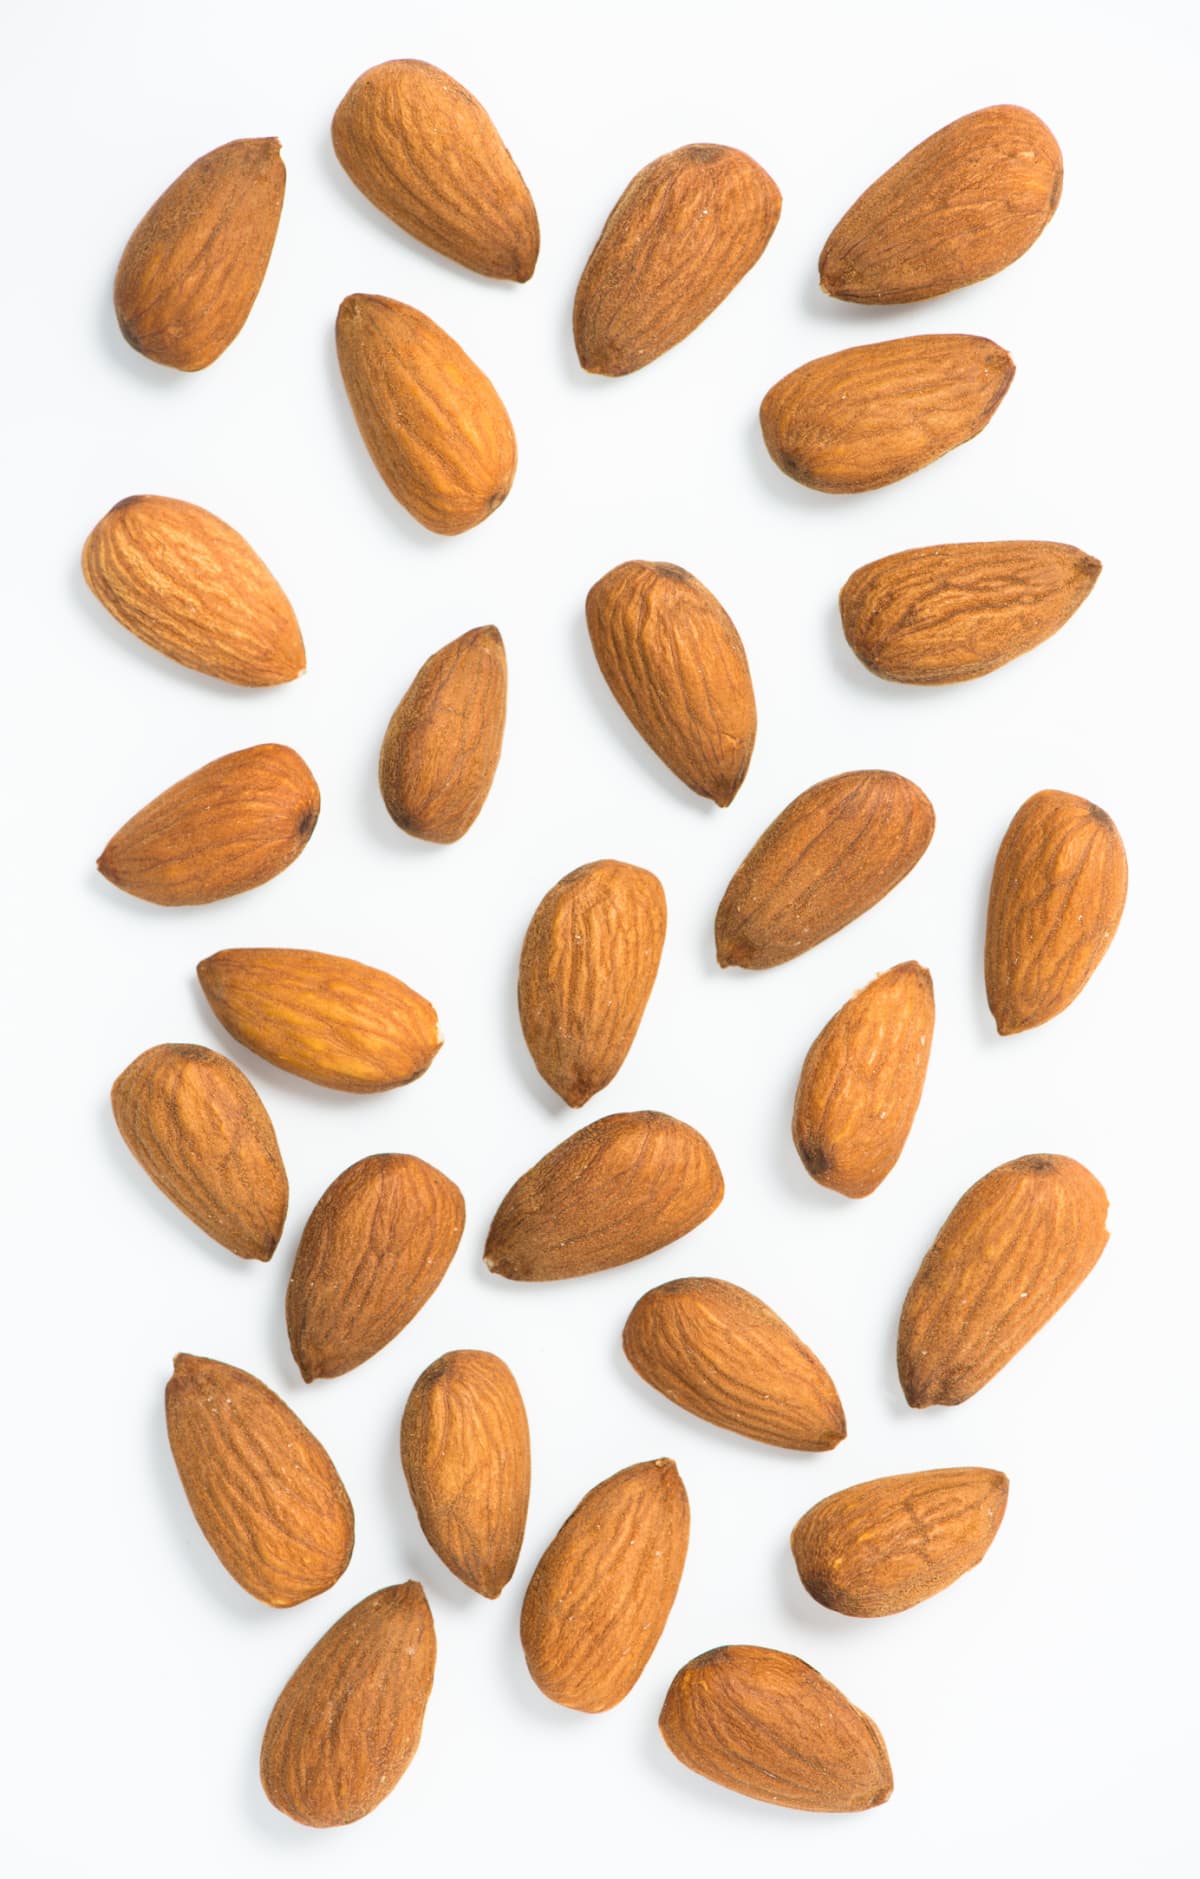 Overhead view of whole almonds arranged on a white background